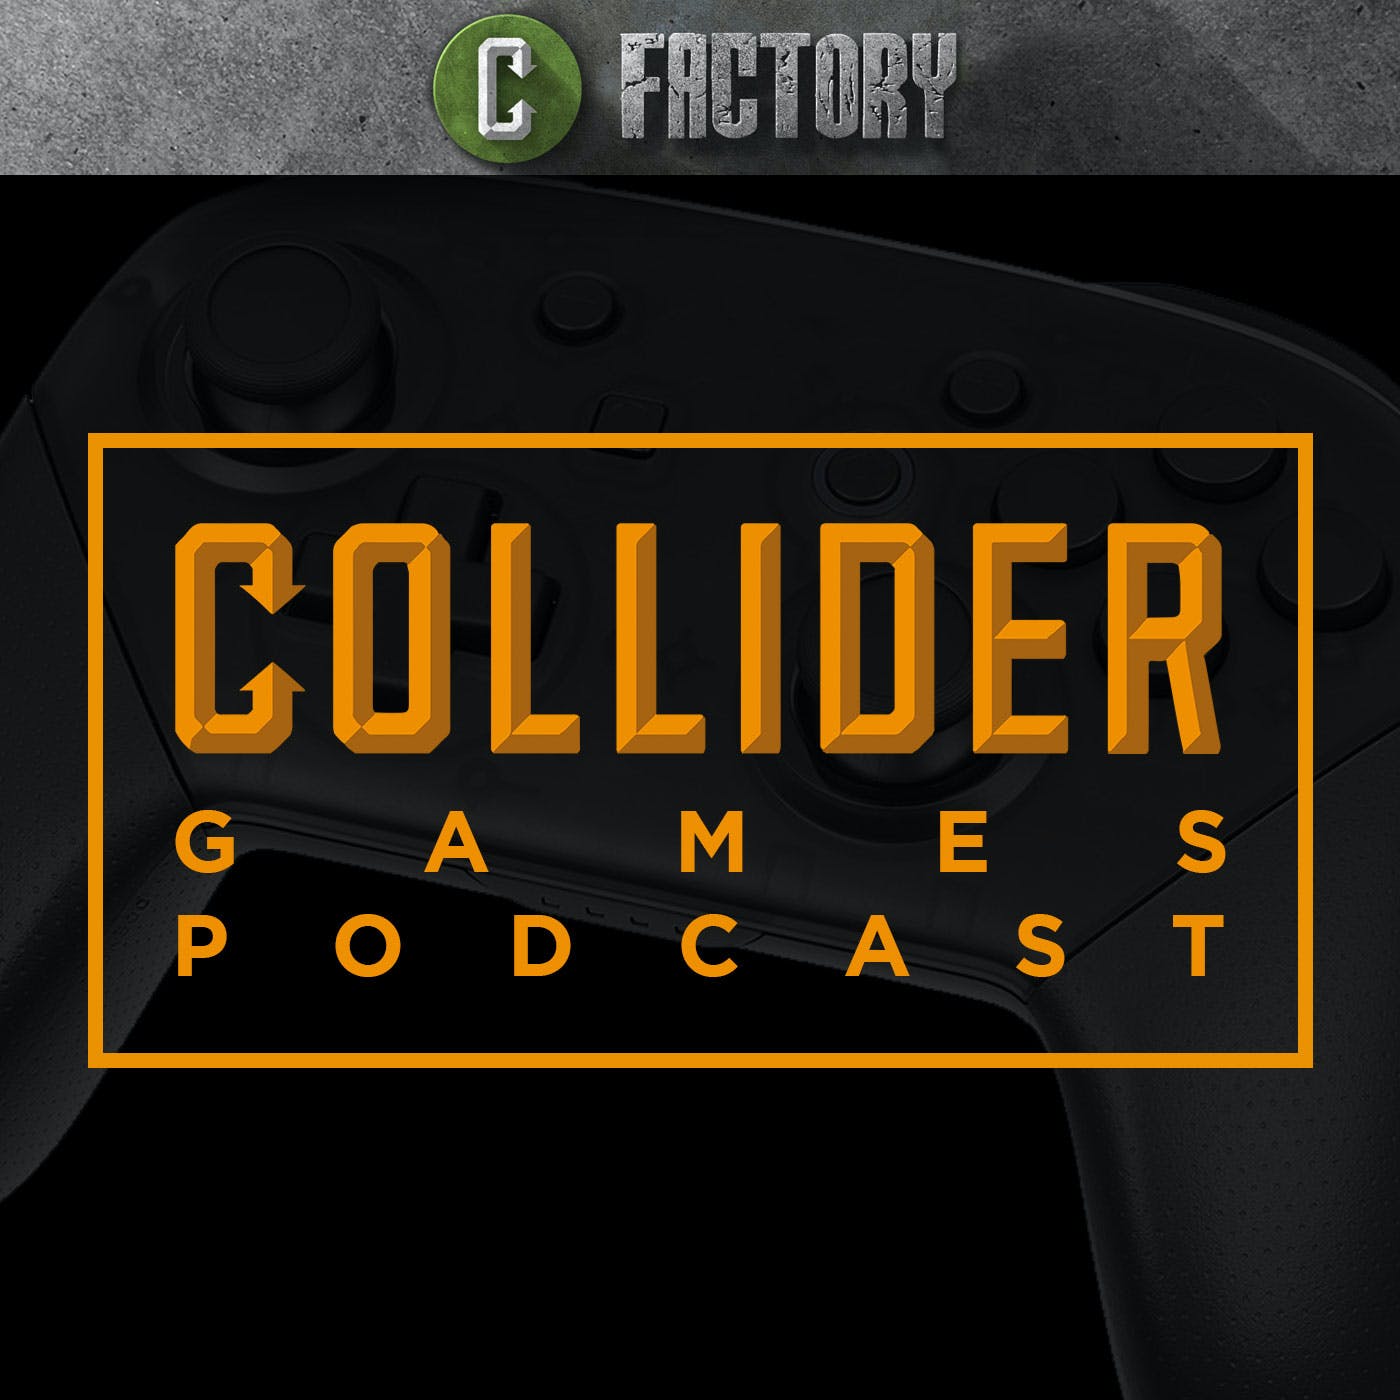 Suicide Squad Game Announced, Spider-Man Exclusive for PS4 Avengers - Collider Games Podcast